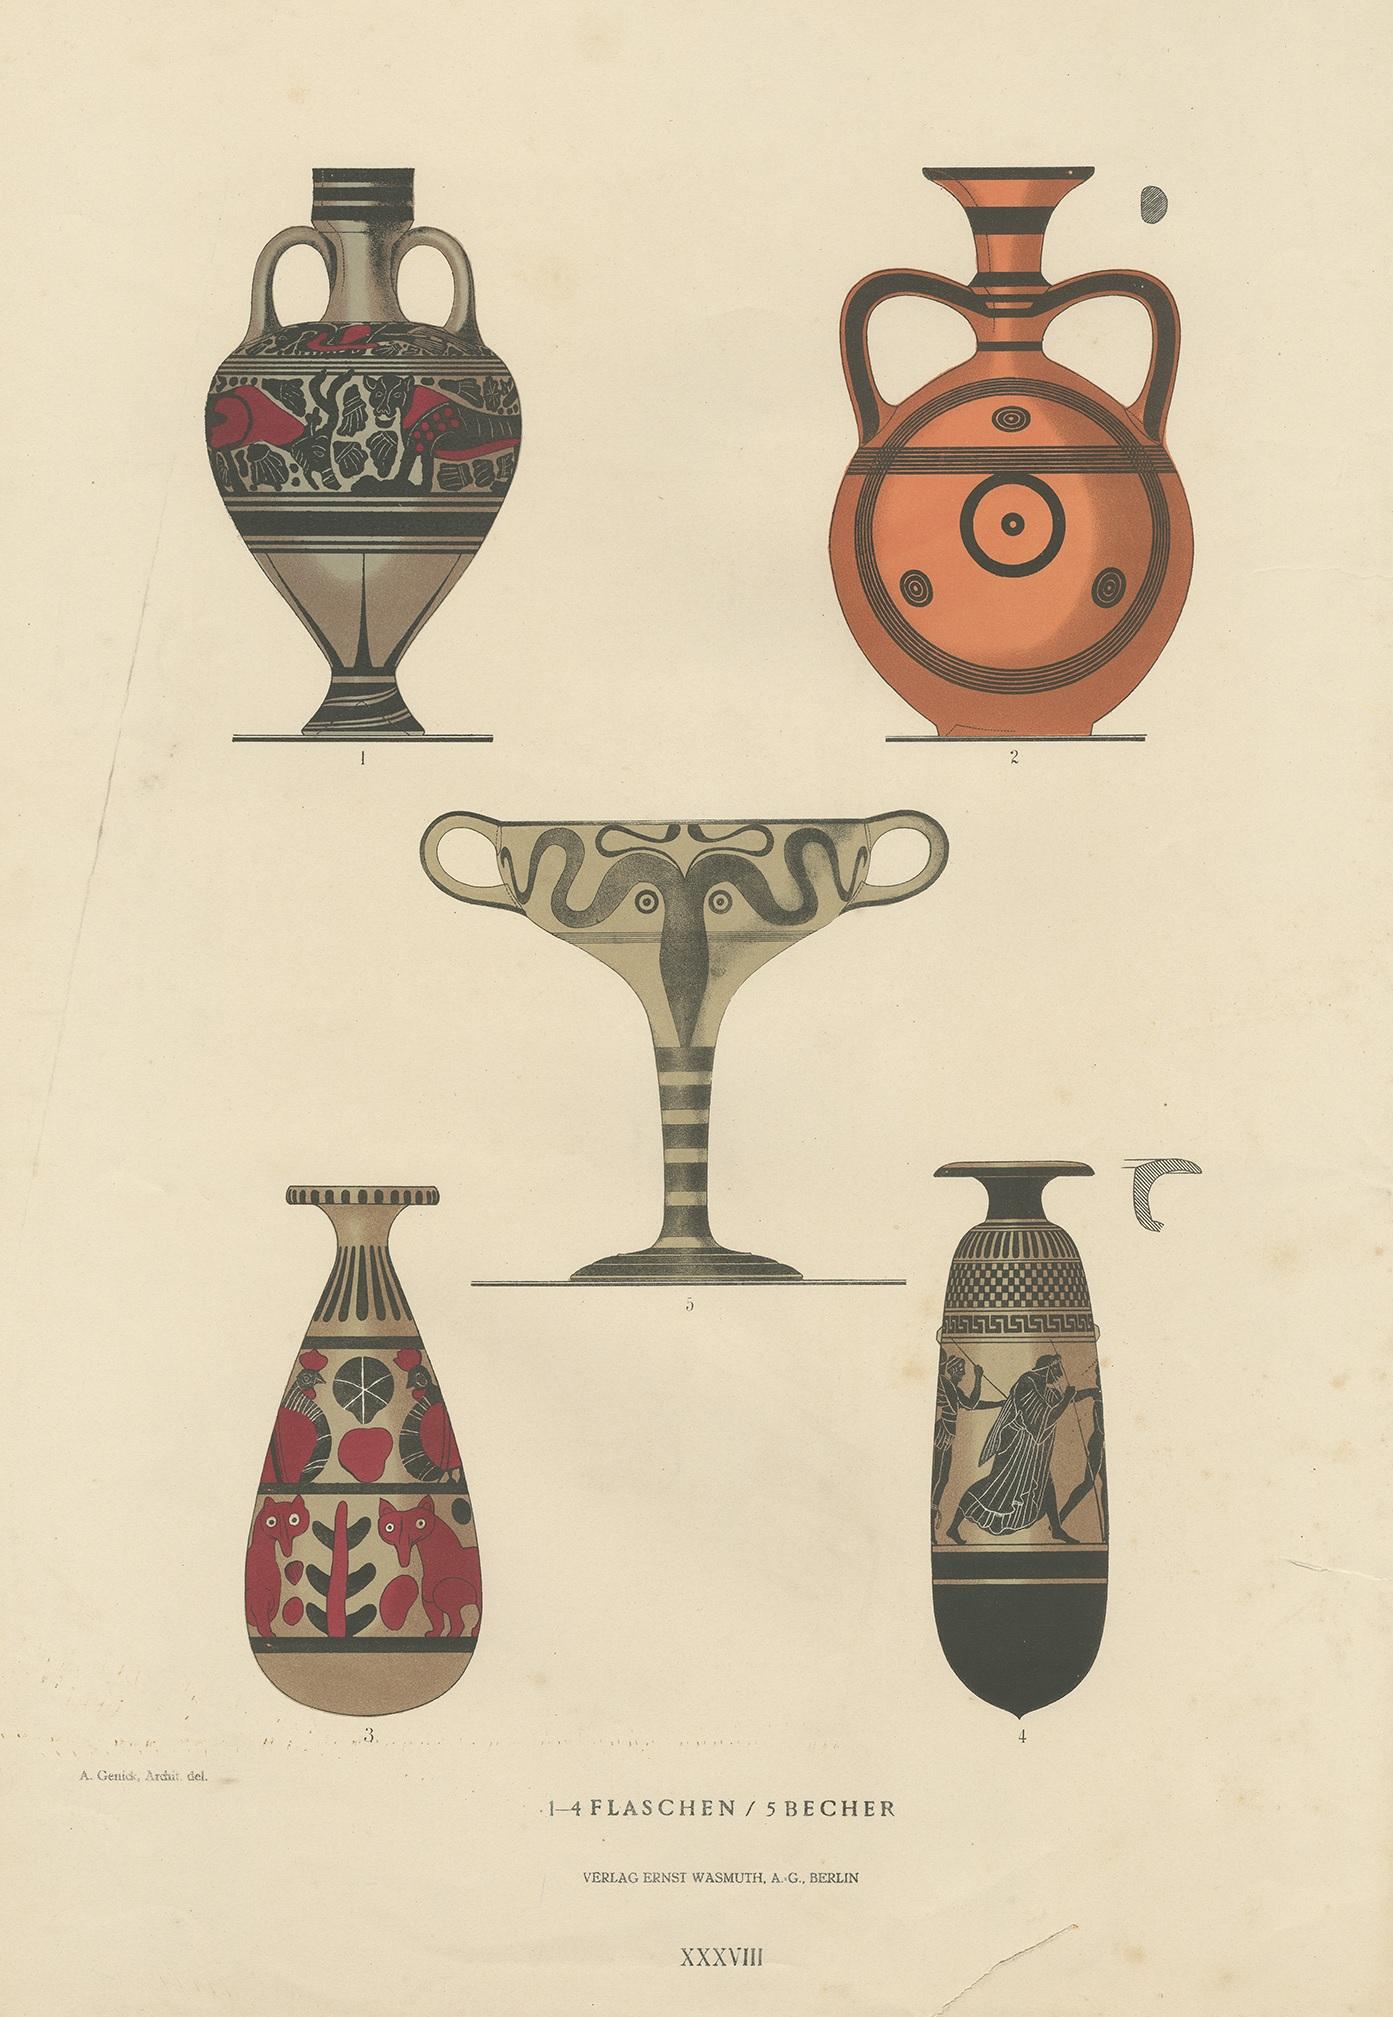 Antique print titled 'Flaschen, Becher'. Color-printed large lithograph by Ernst Wasmuth depicting Greek bottels and a Greek goblet. This print originates from 'Griechische Keramik' by A. Genick. Albert Genick, an architect by training, was one of